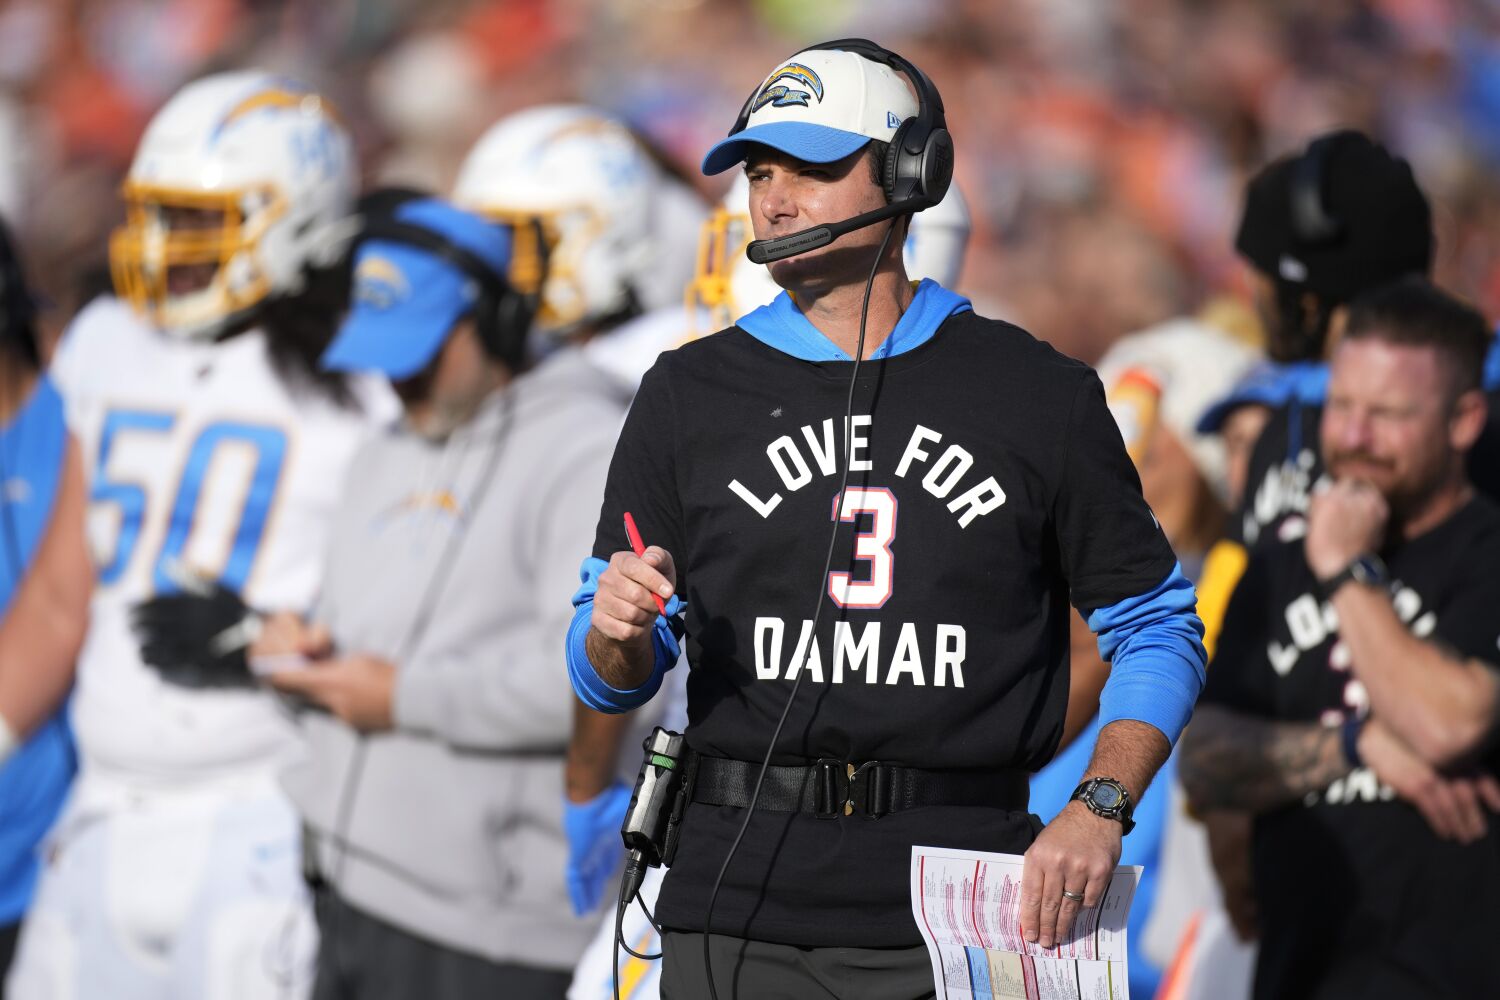 Chargers lose Mike Williams and finale to lowly Broncos. Next: Jacksonville